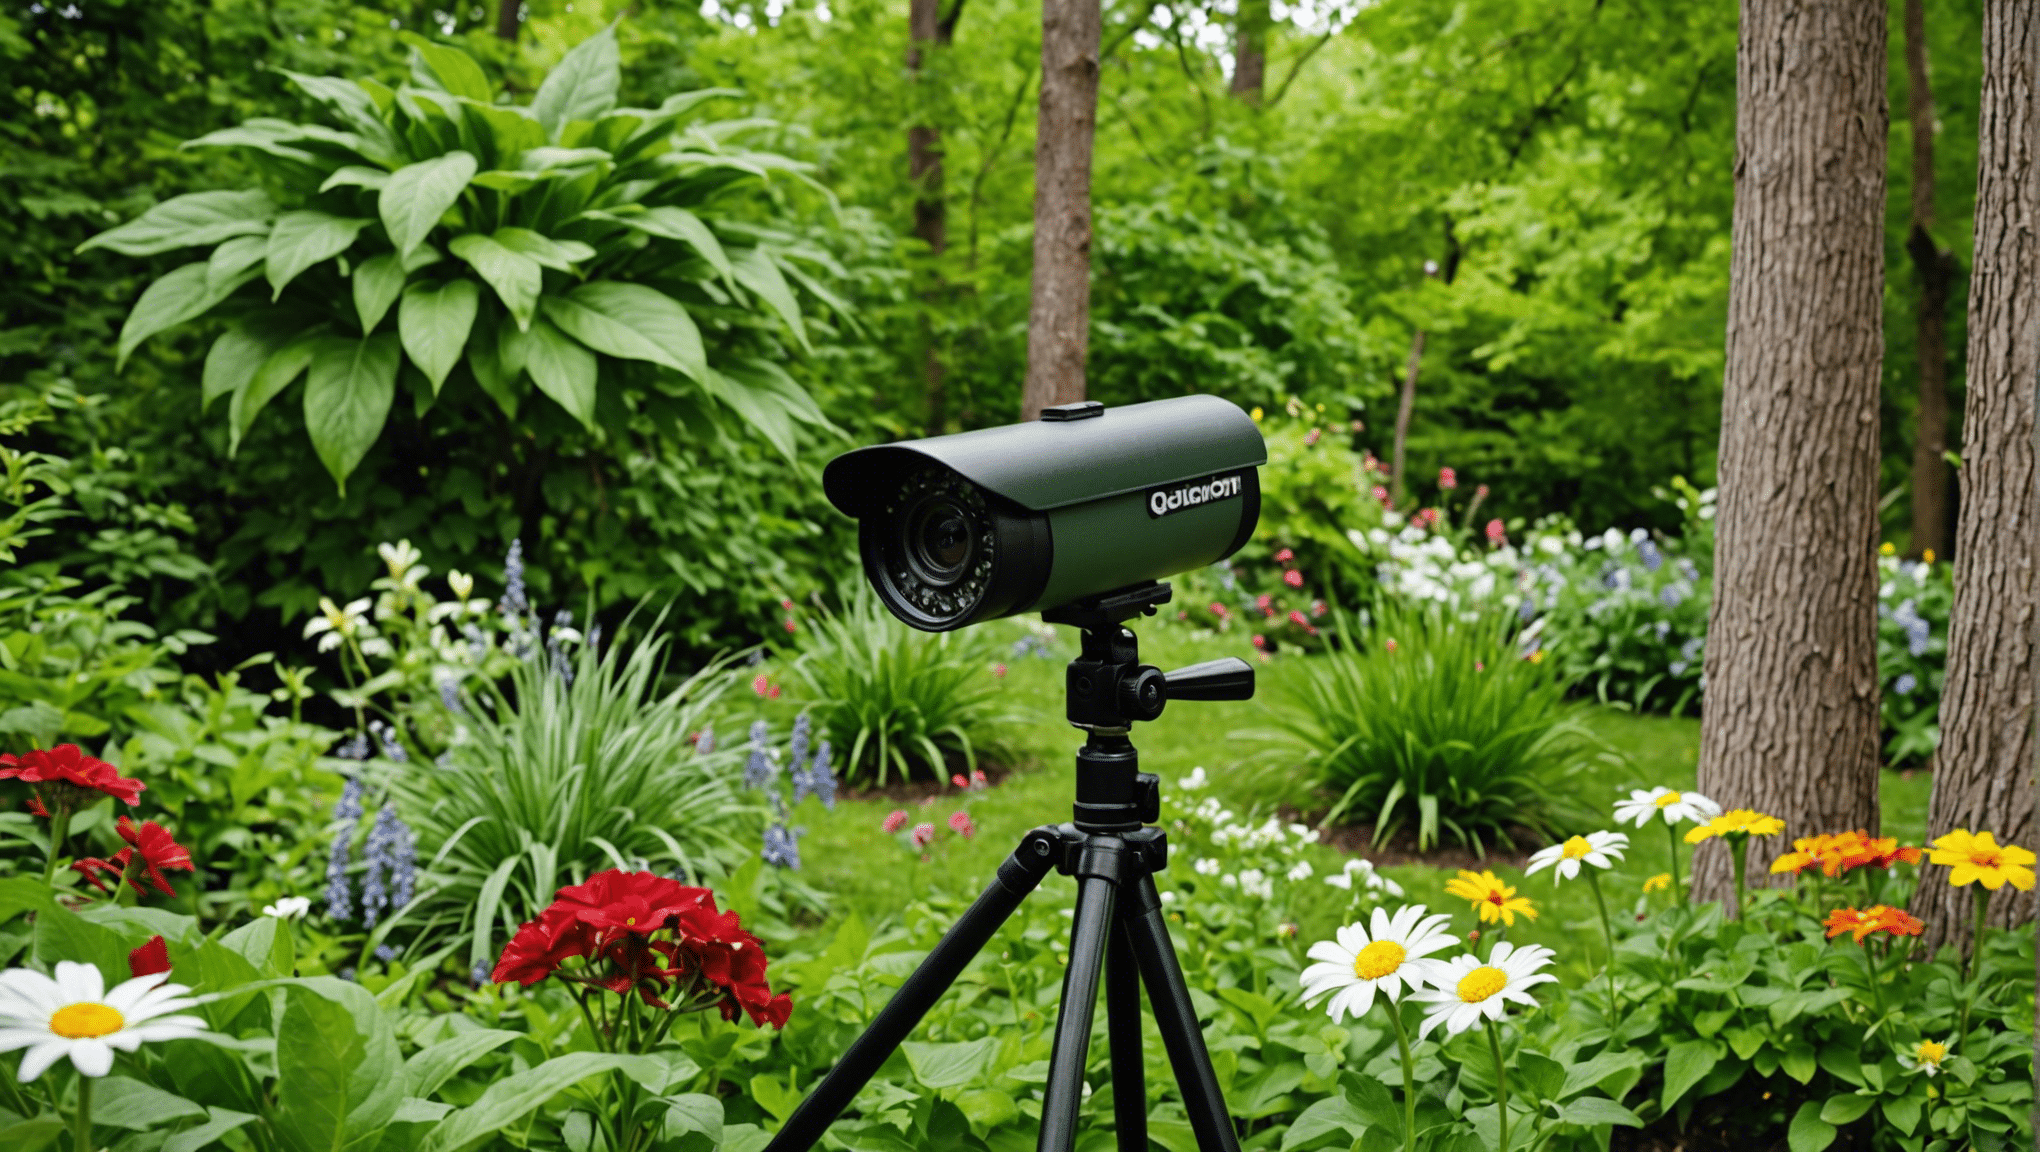 discover our backyard cameras to capture animals in action and bring nature into focus. explore our selection of high-quality, motion-activated cameras for wildlife enthusiasts.